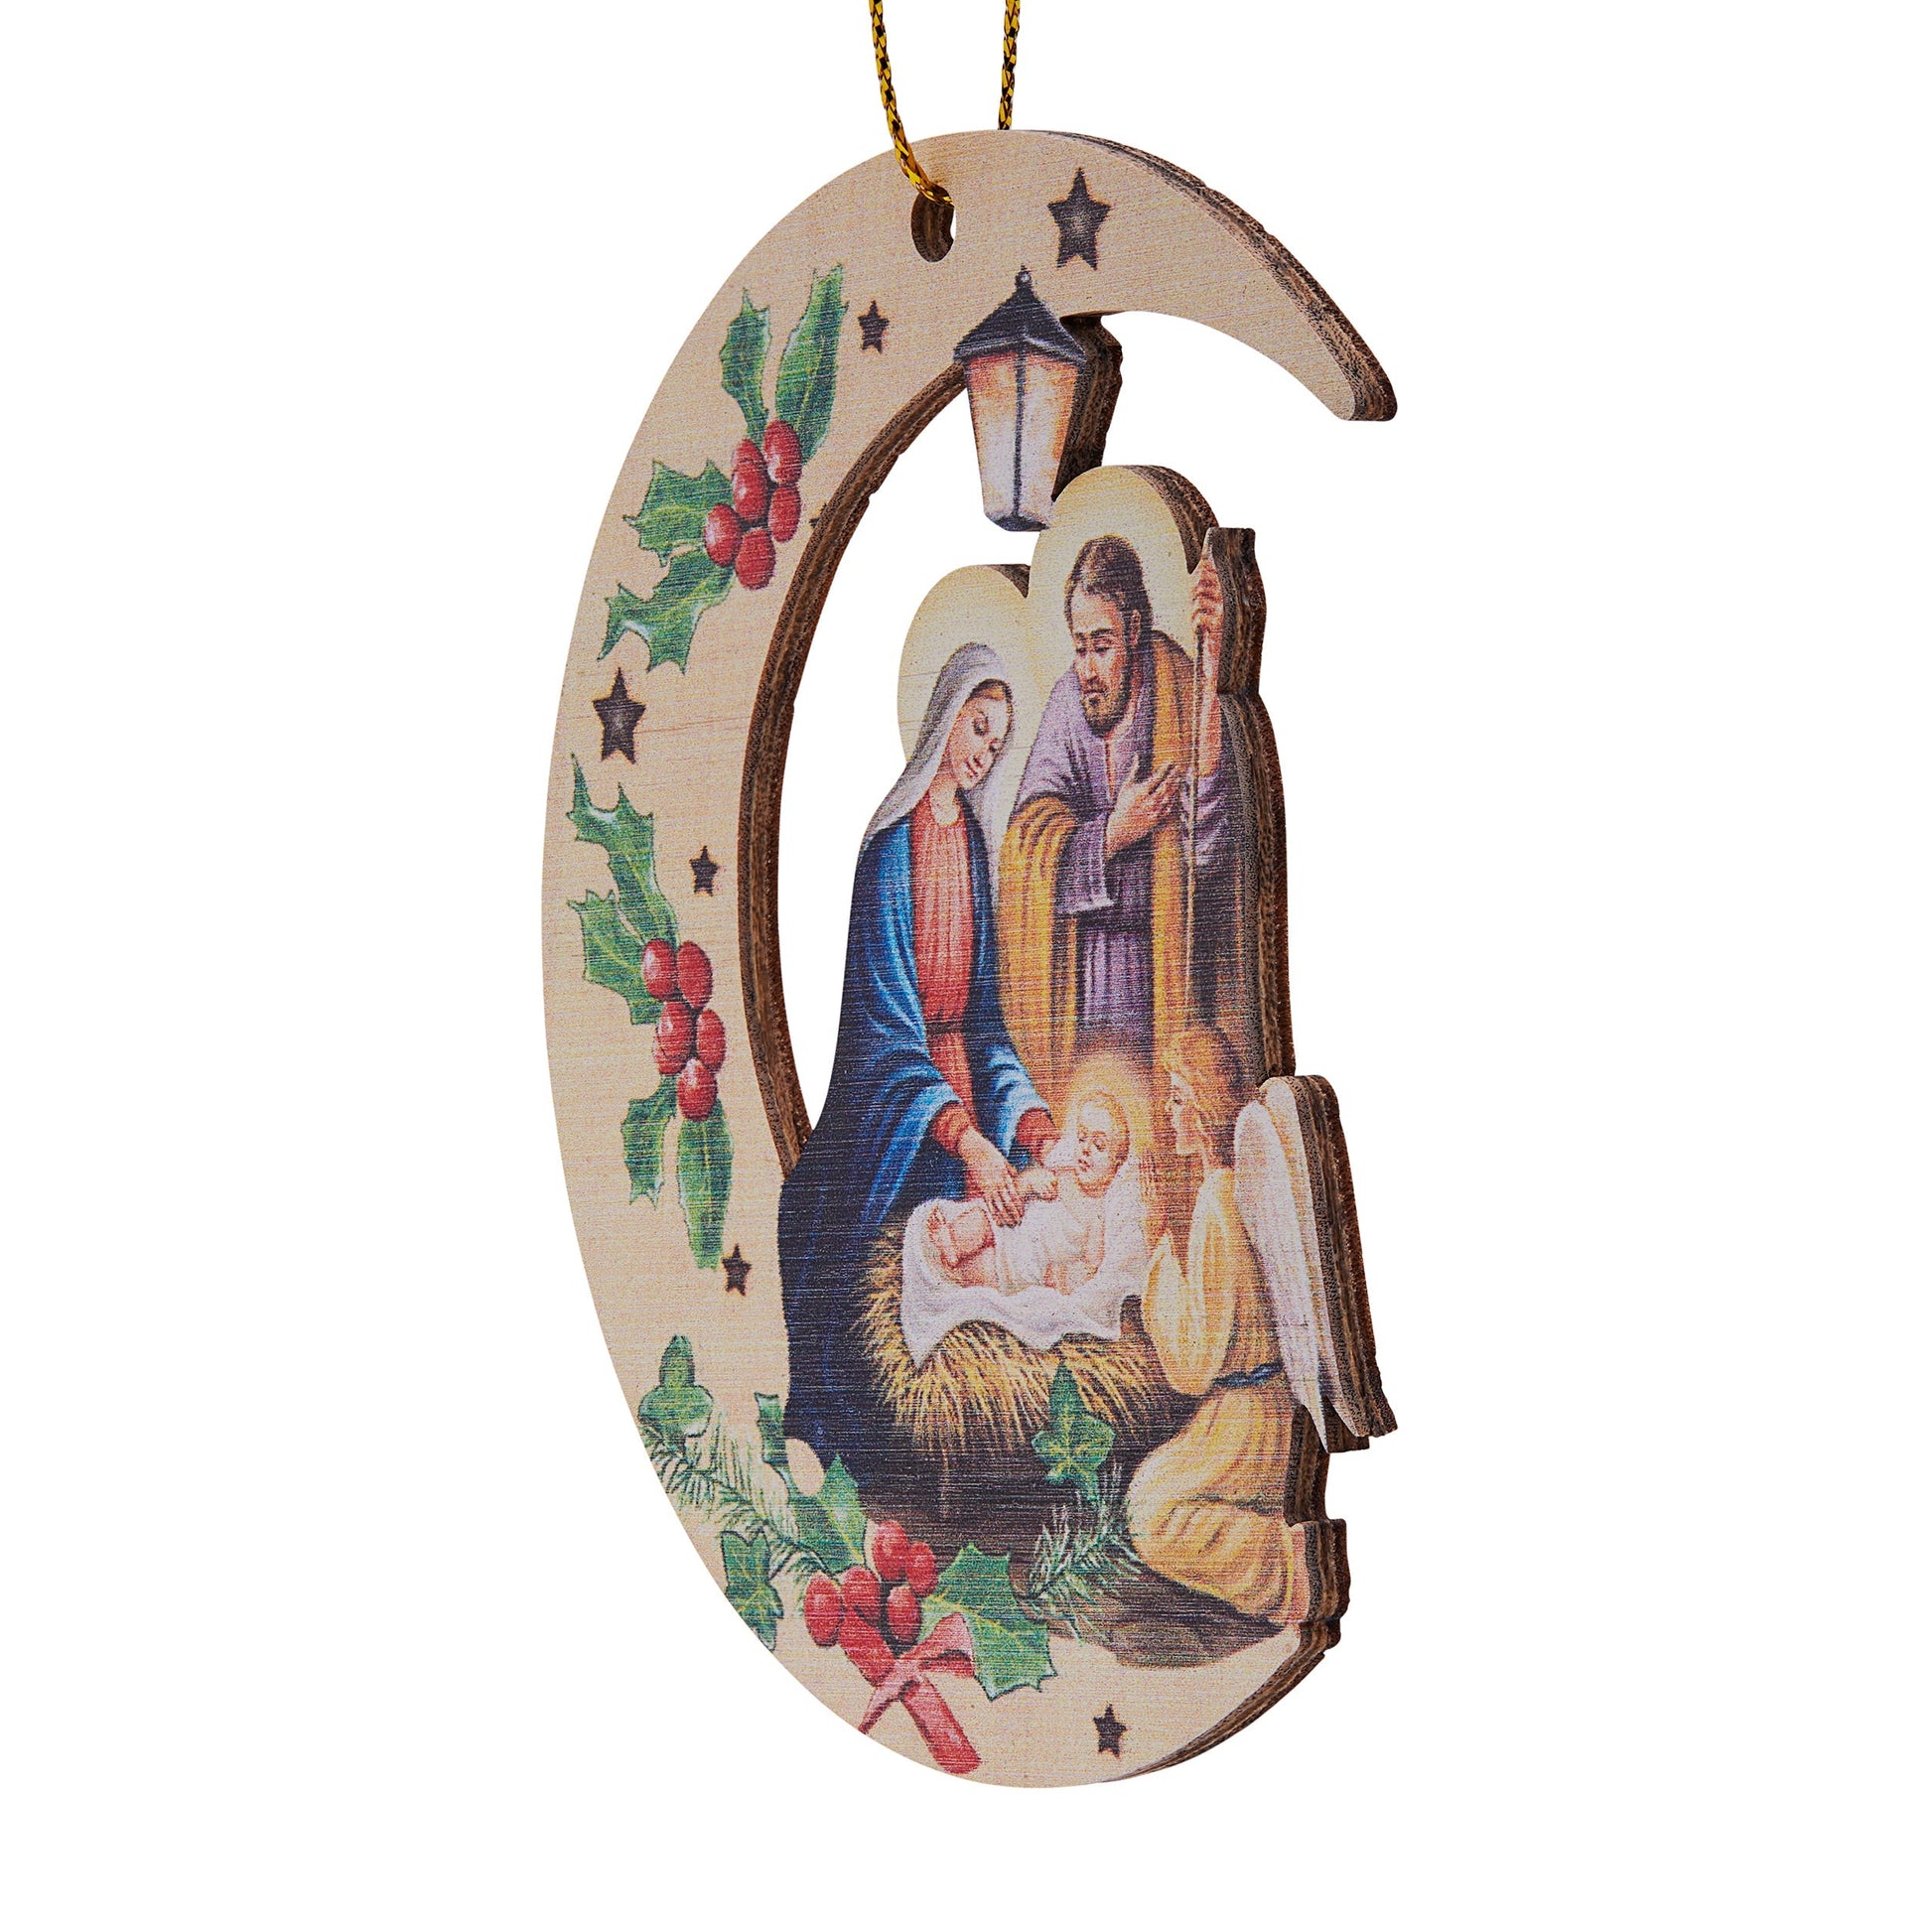 Mondo Cattolico 9.50 cm (3.74 in) Carved Wooden Christmas Tree Decoration in the Shape of Moon With Nativity Scene